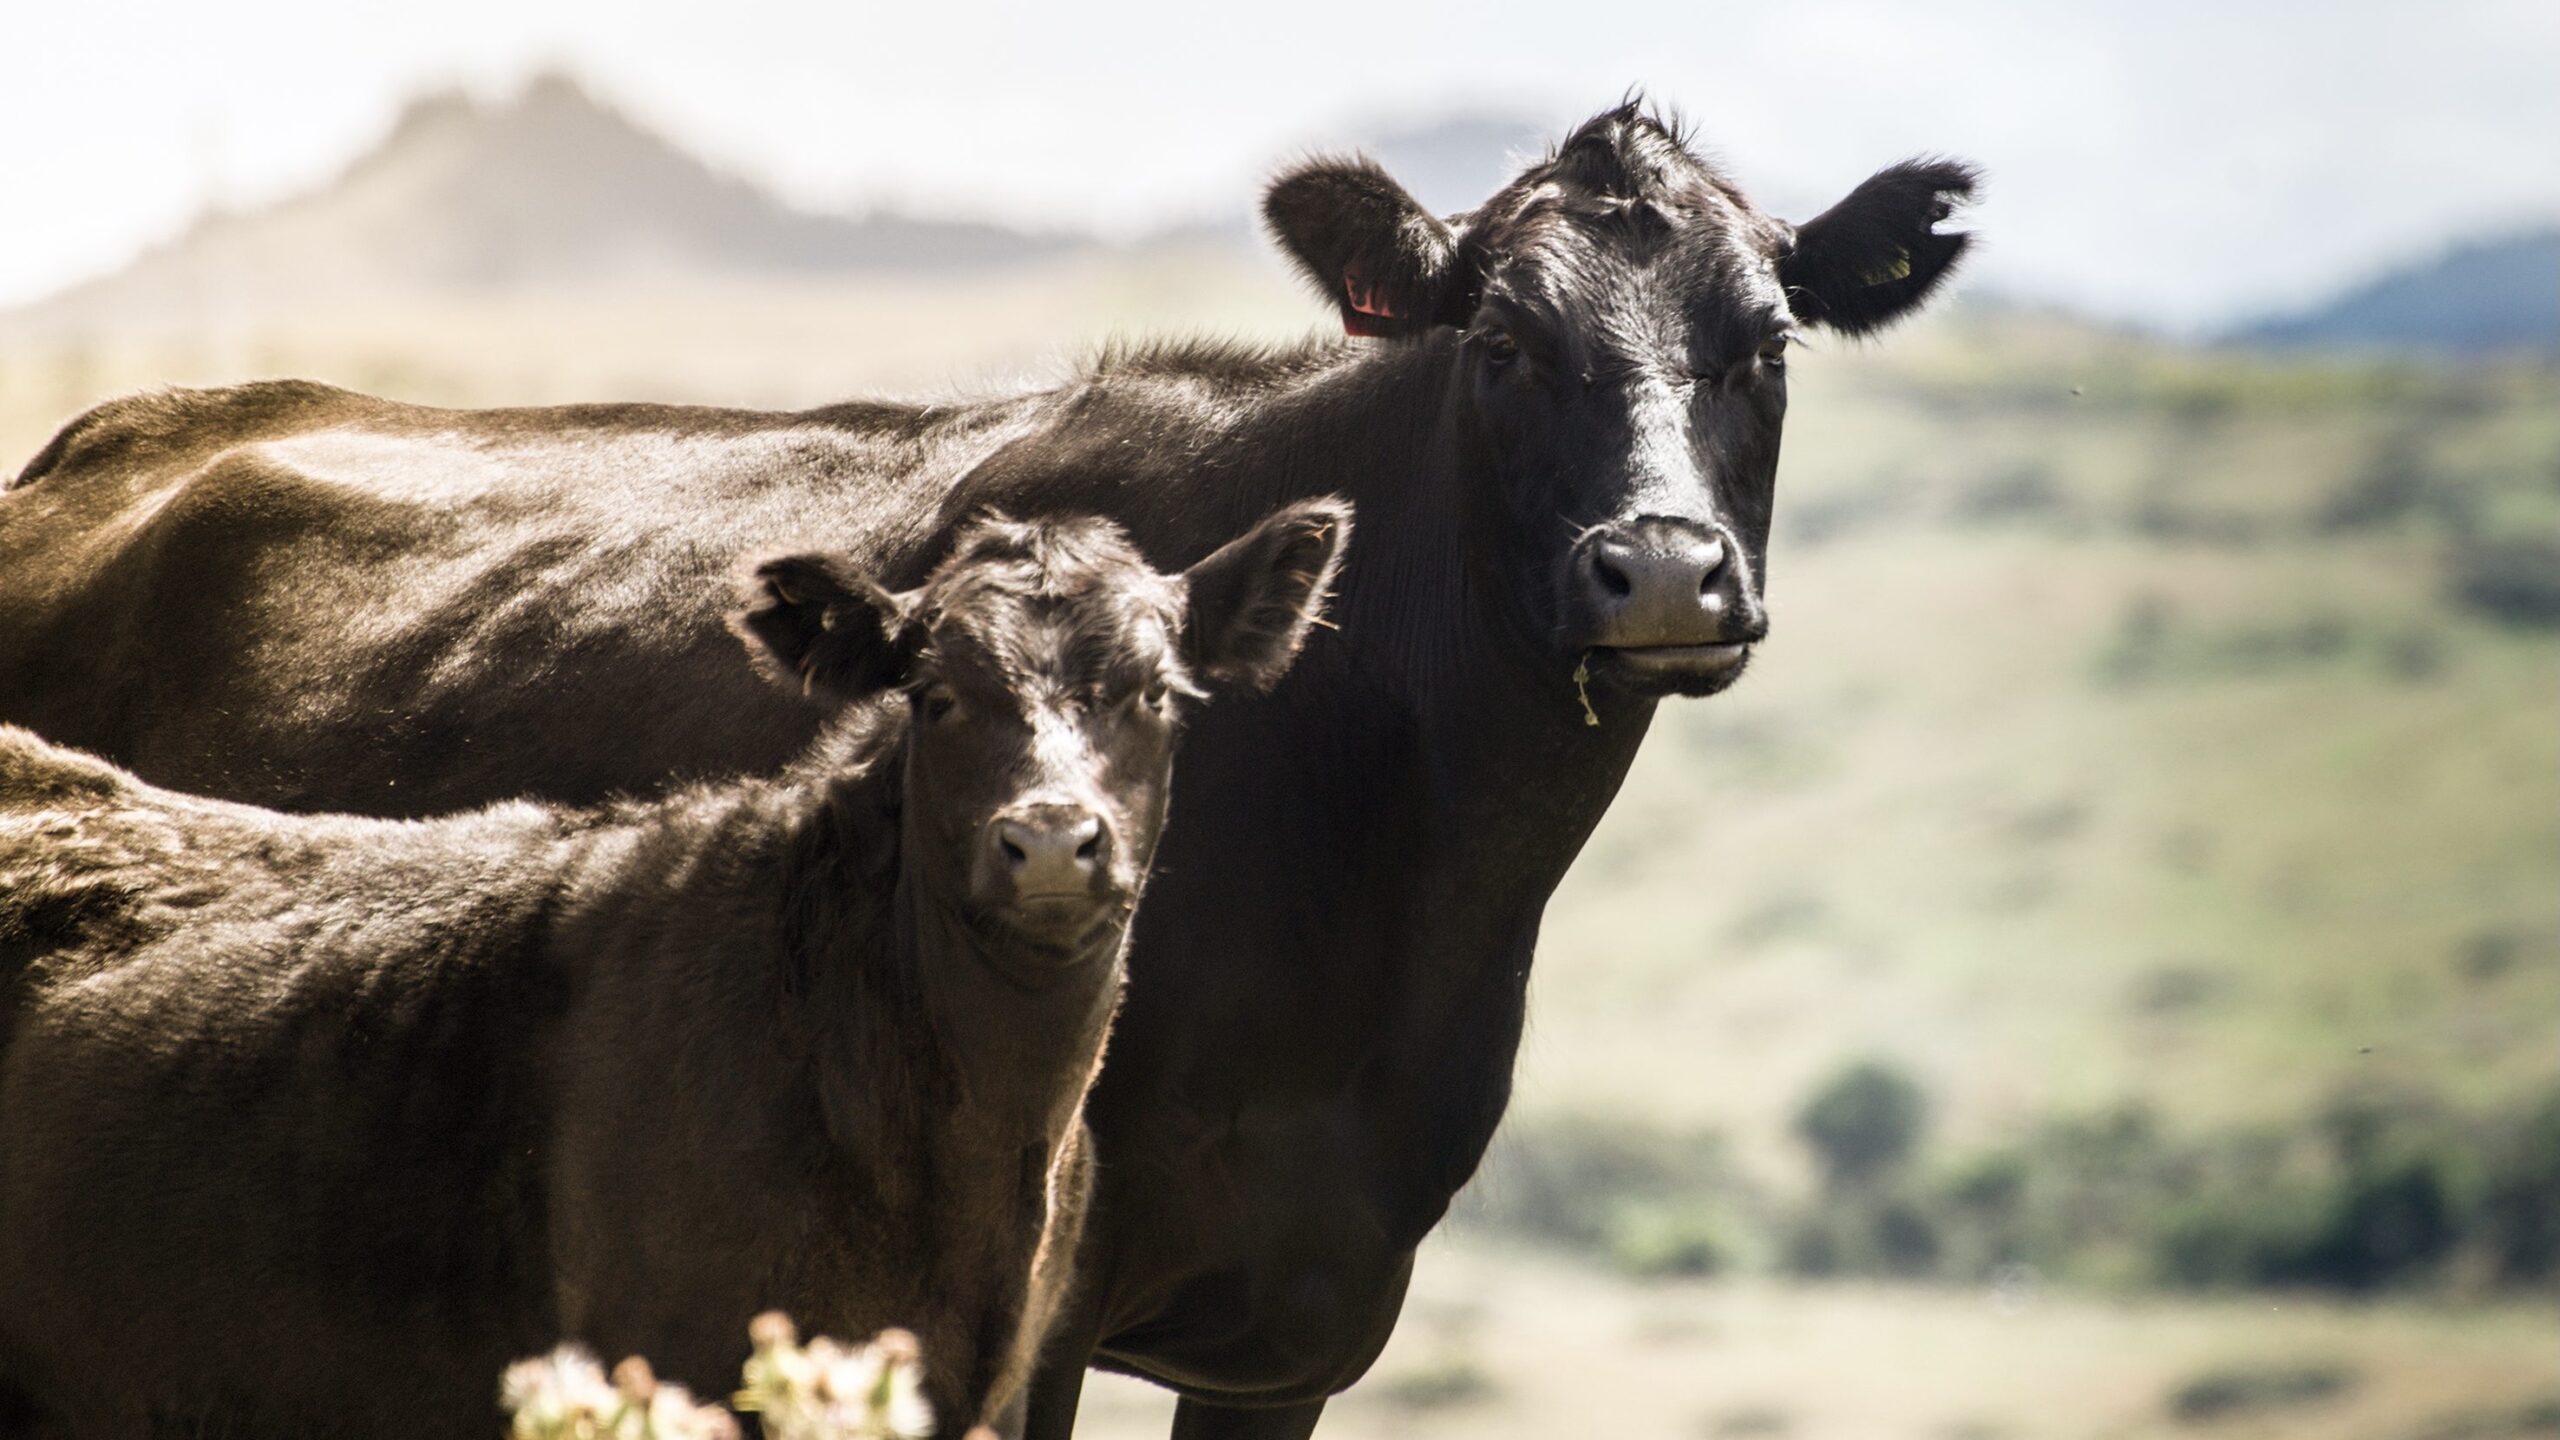 New Zealand Proposes New Climate Tax Directed At ‘Greenhouse Gasses’ Produced By Farm Animals - Harbingers Daily